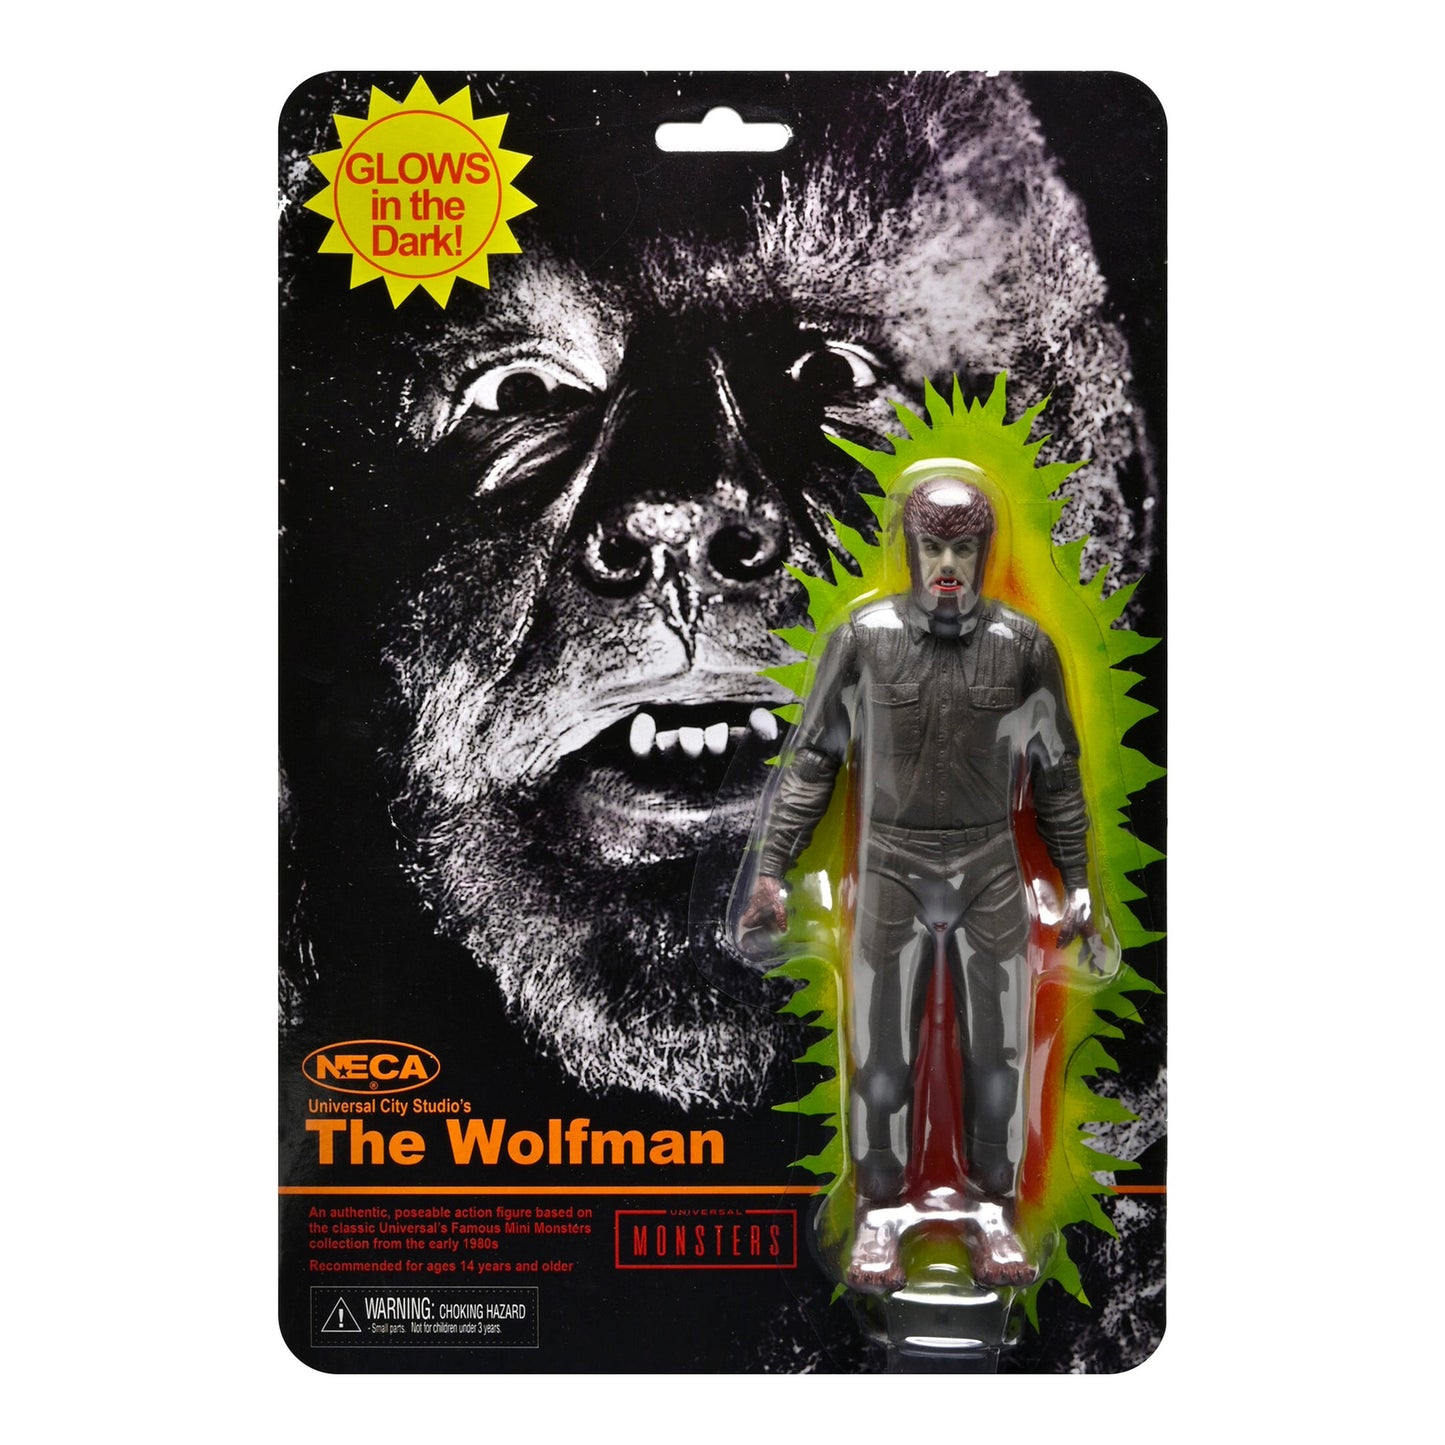 NECA Universal Monsters The Wolfman Glow in the Dark